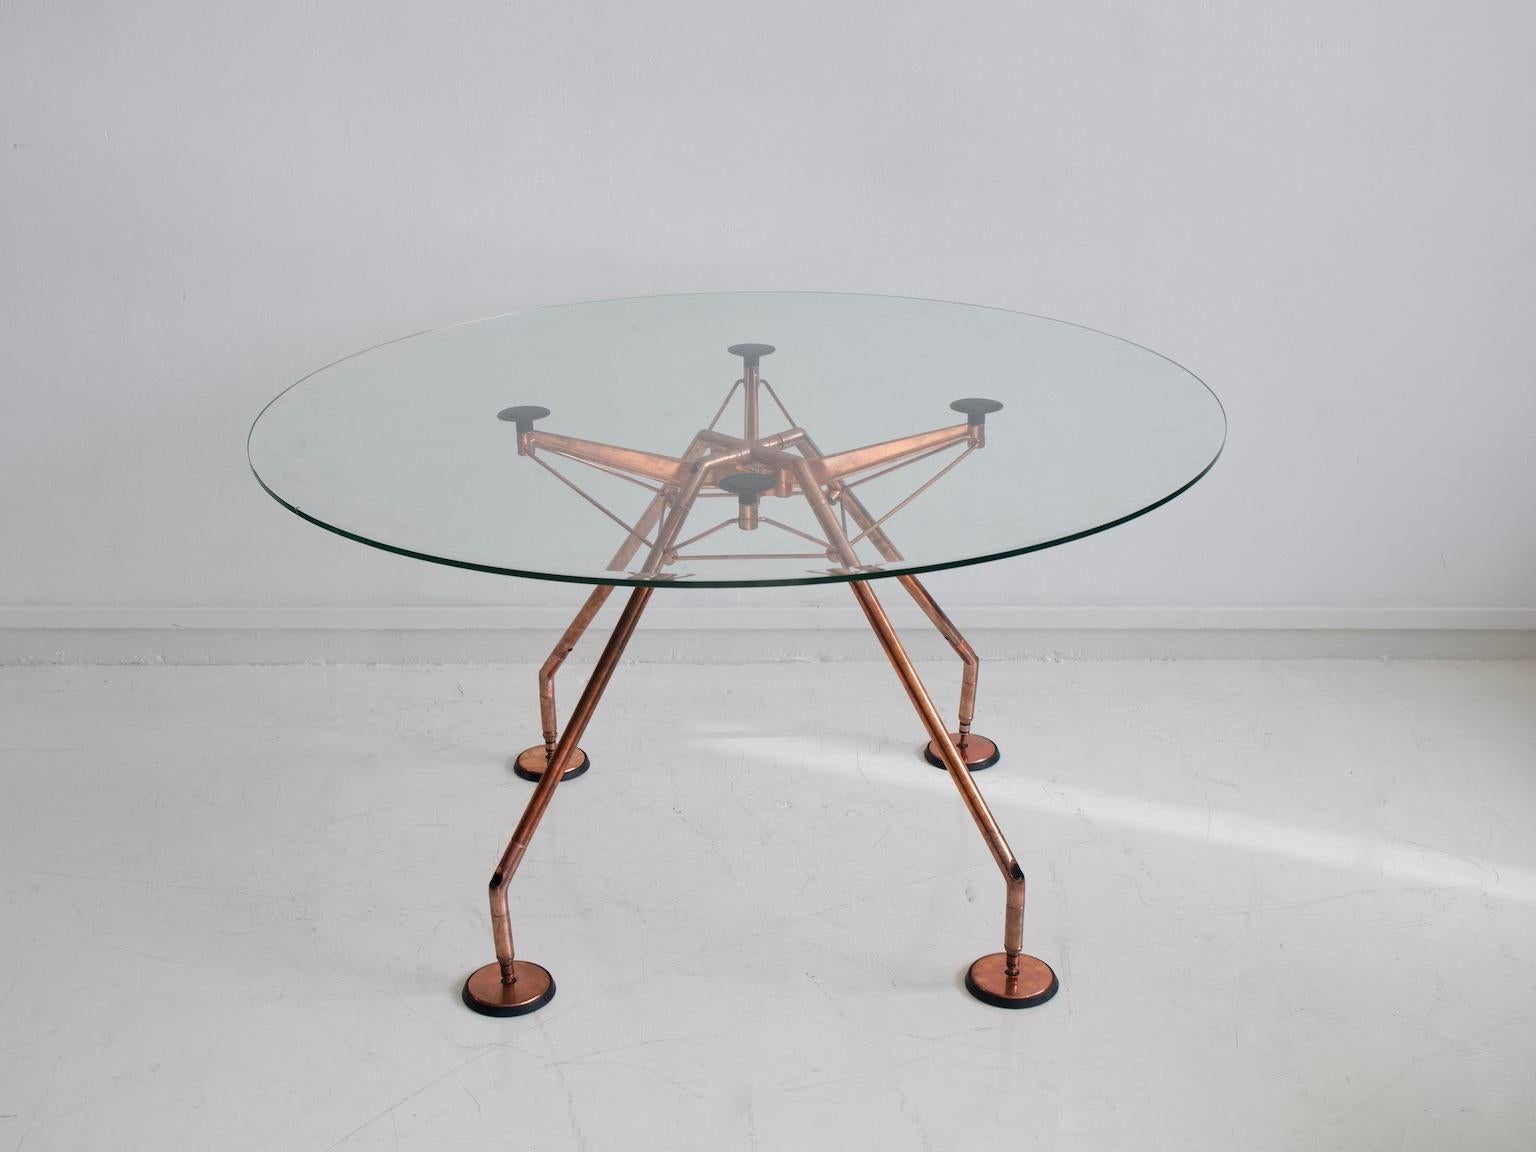 Dining table, model Nomos, design by Sir Norman Foster & Partner for Tecno, Italy. Designed in 1986. Filigree frame made of steel tube and aluminum, which has been renewed and bathed in copper. Loose clear glass plate.